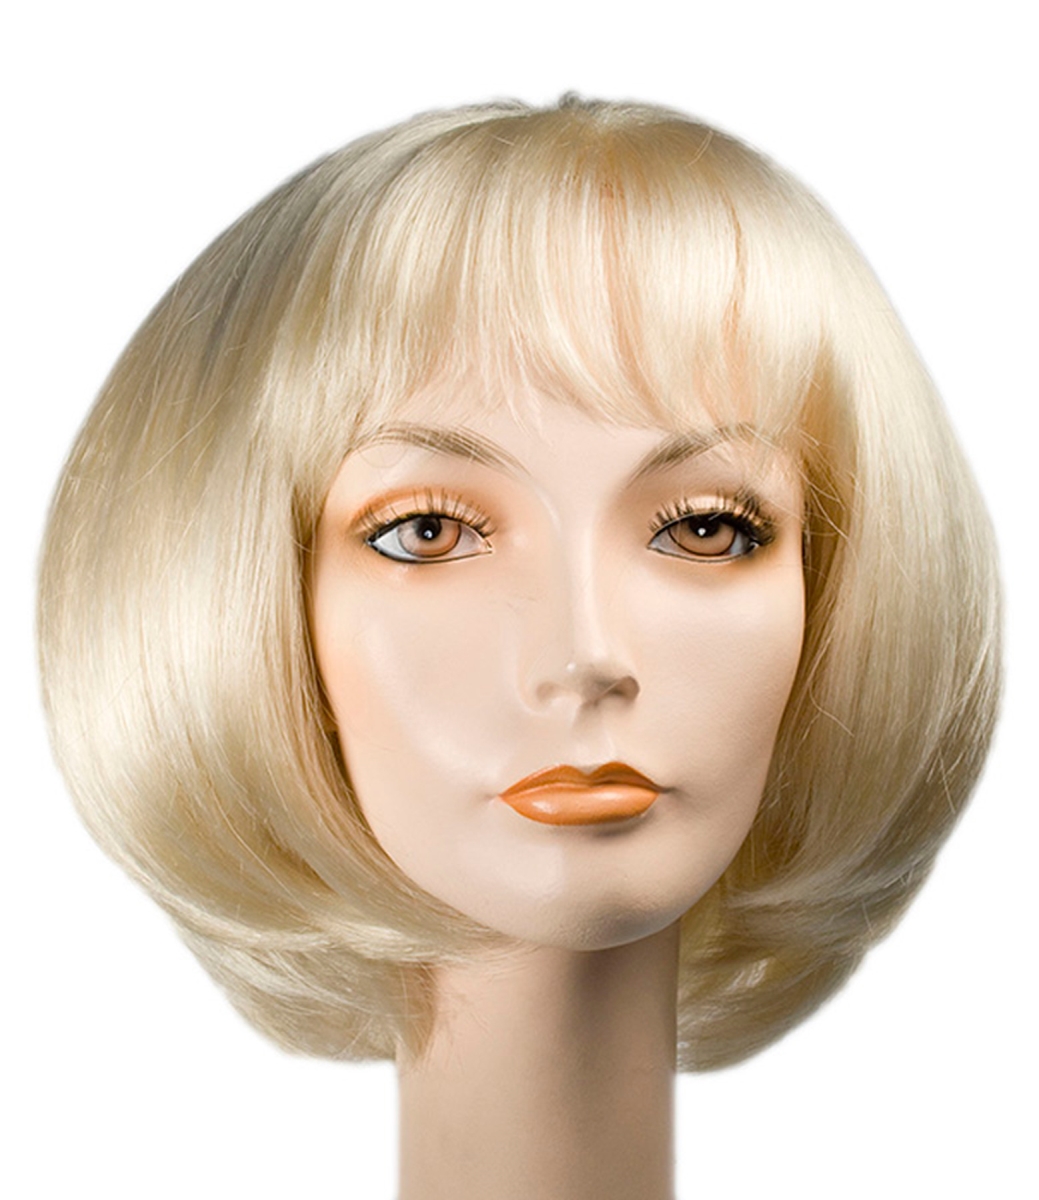 Bald Curly Clown With Front Wig - White